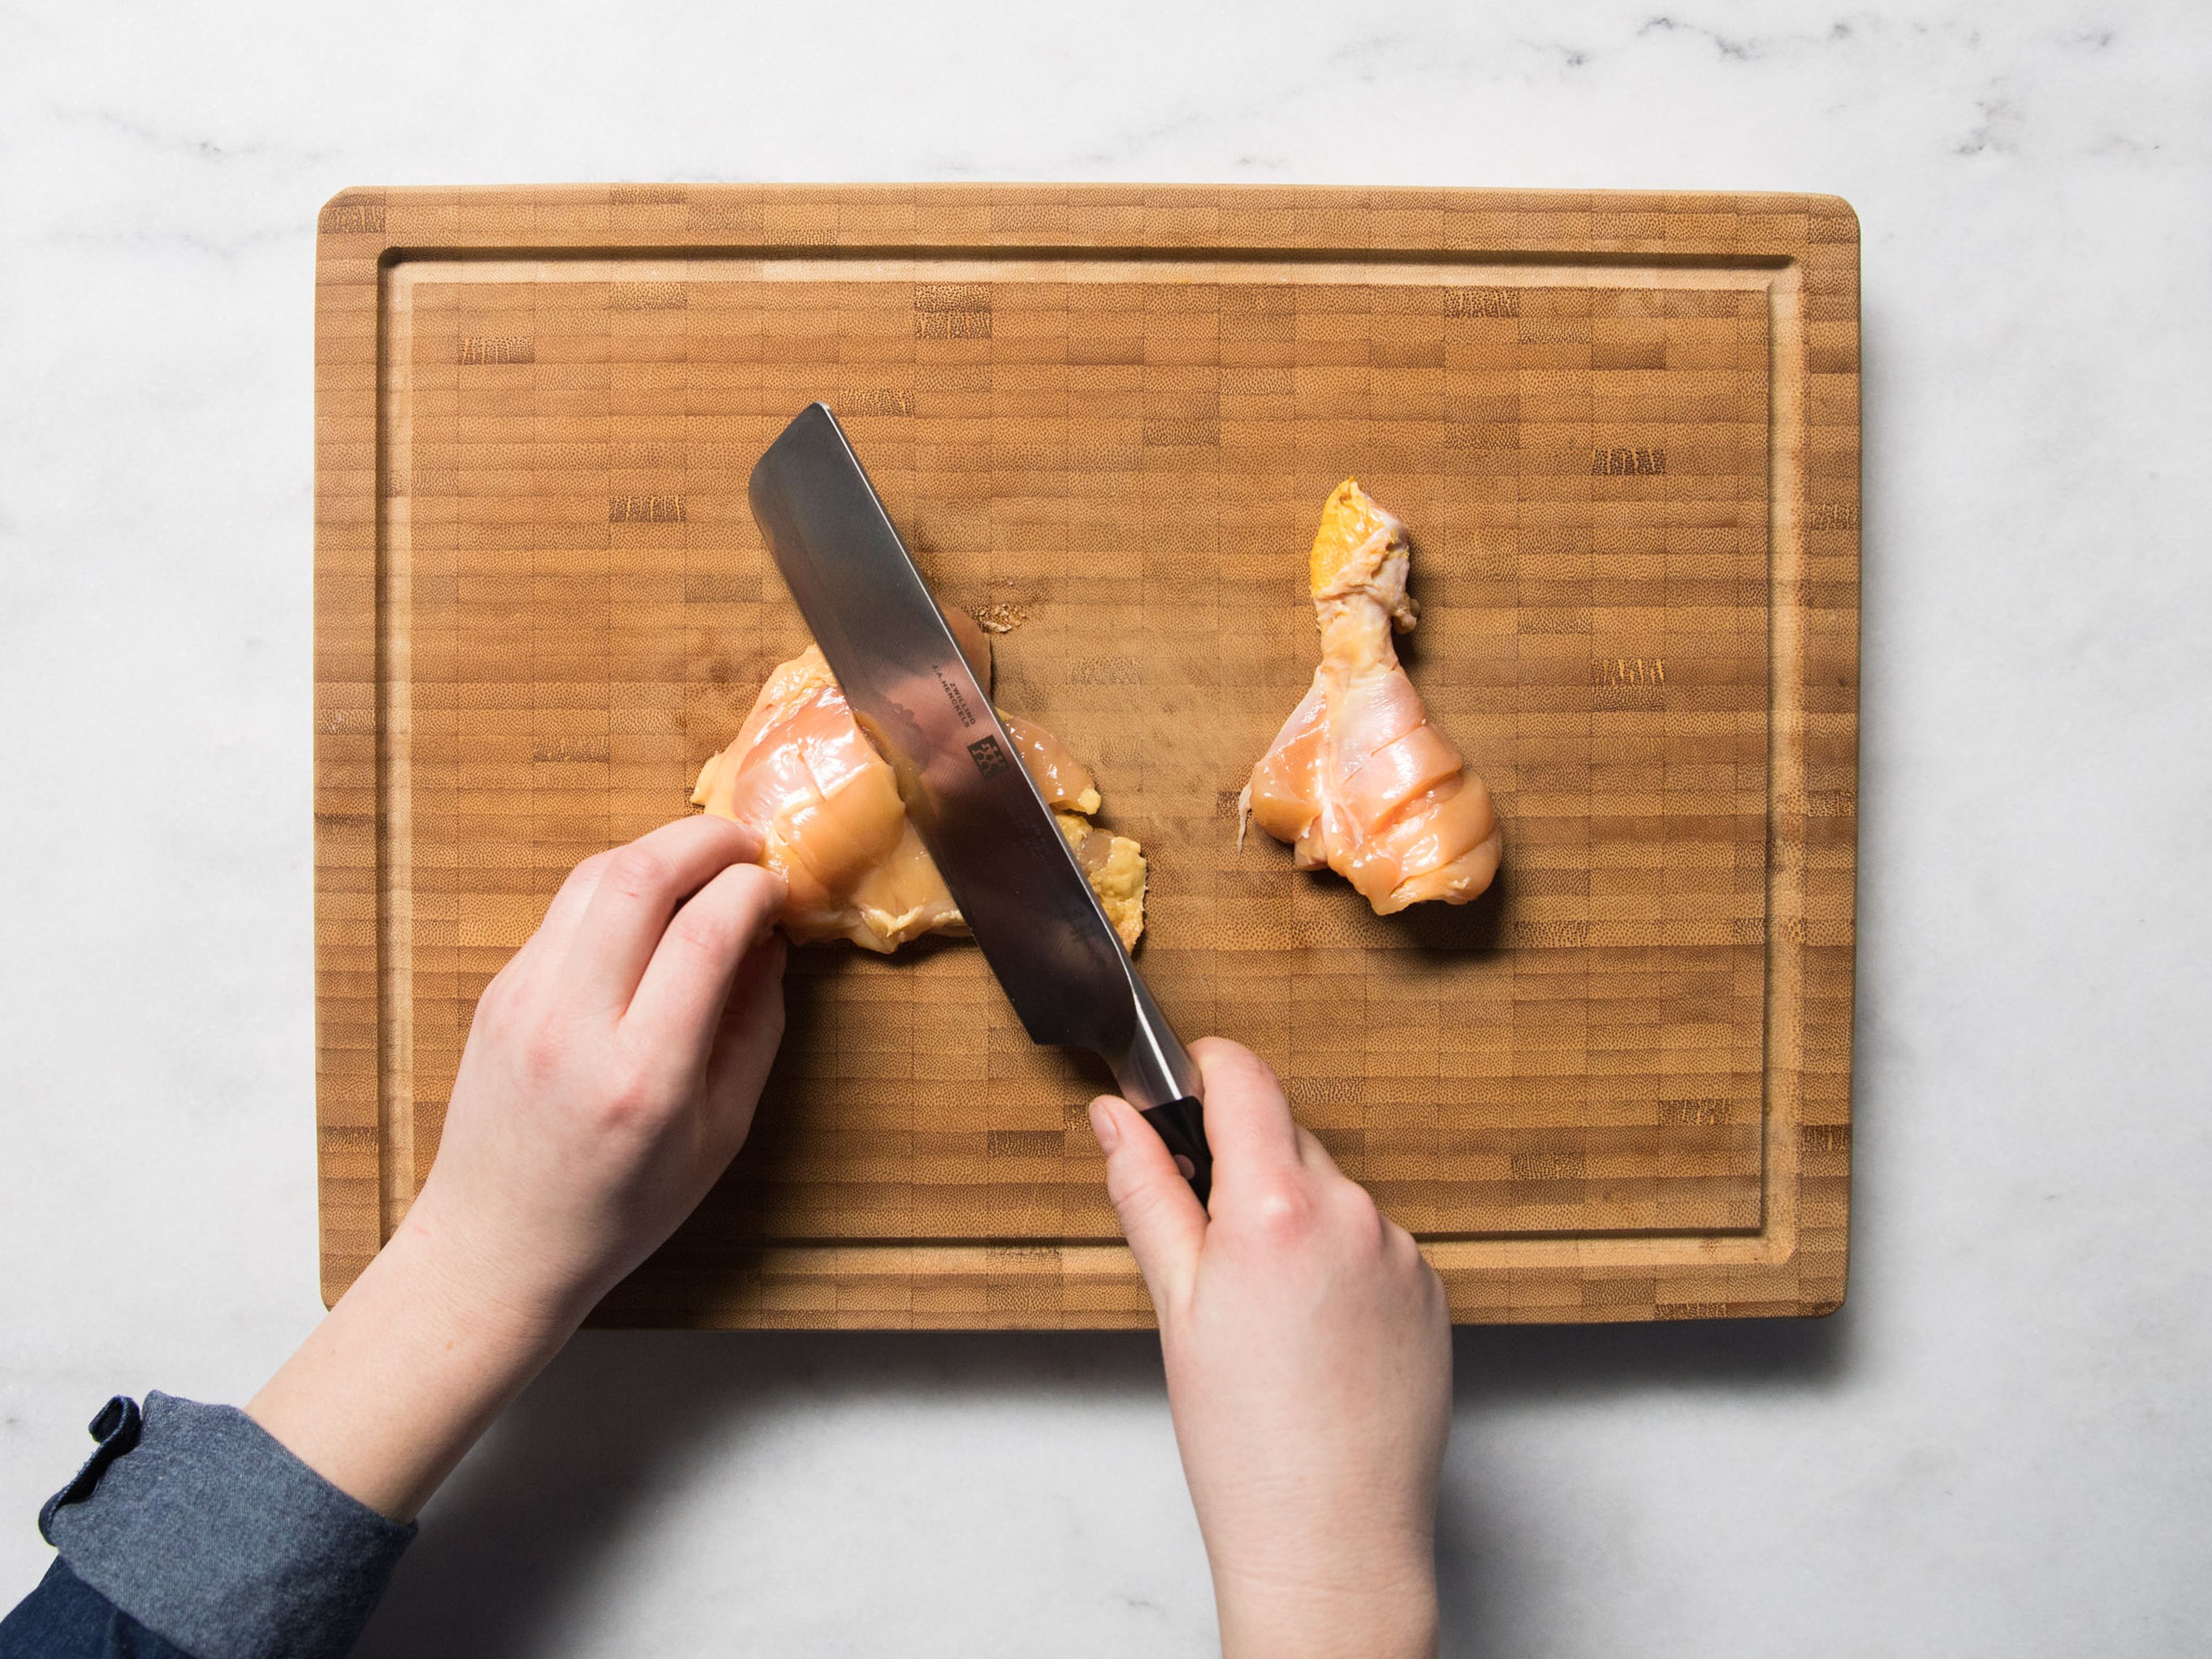 Separate the chicken thighs and drumsticks by cutting through the joint. Score the chicken a few times on one side, set aside. Peel and mince garlic and ginger. Add salt and use the flat side of a knife to work the mixture into a paste.